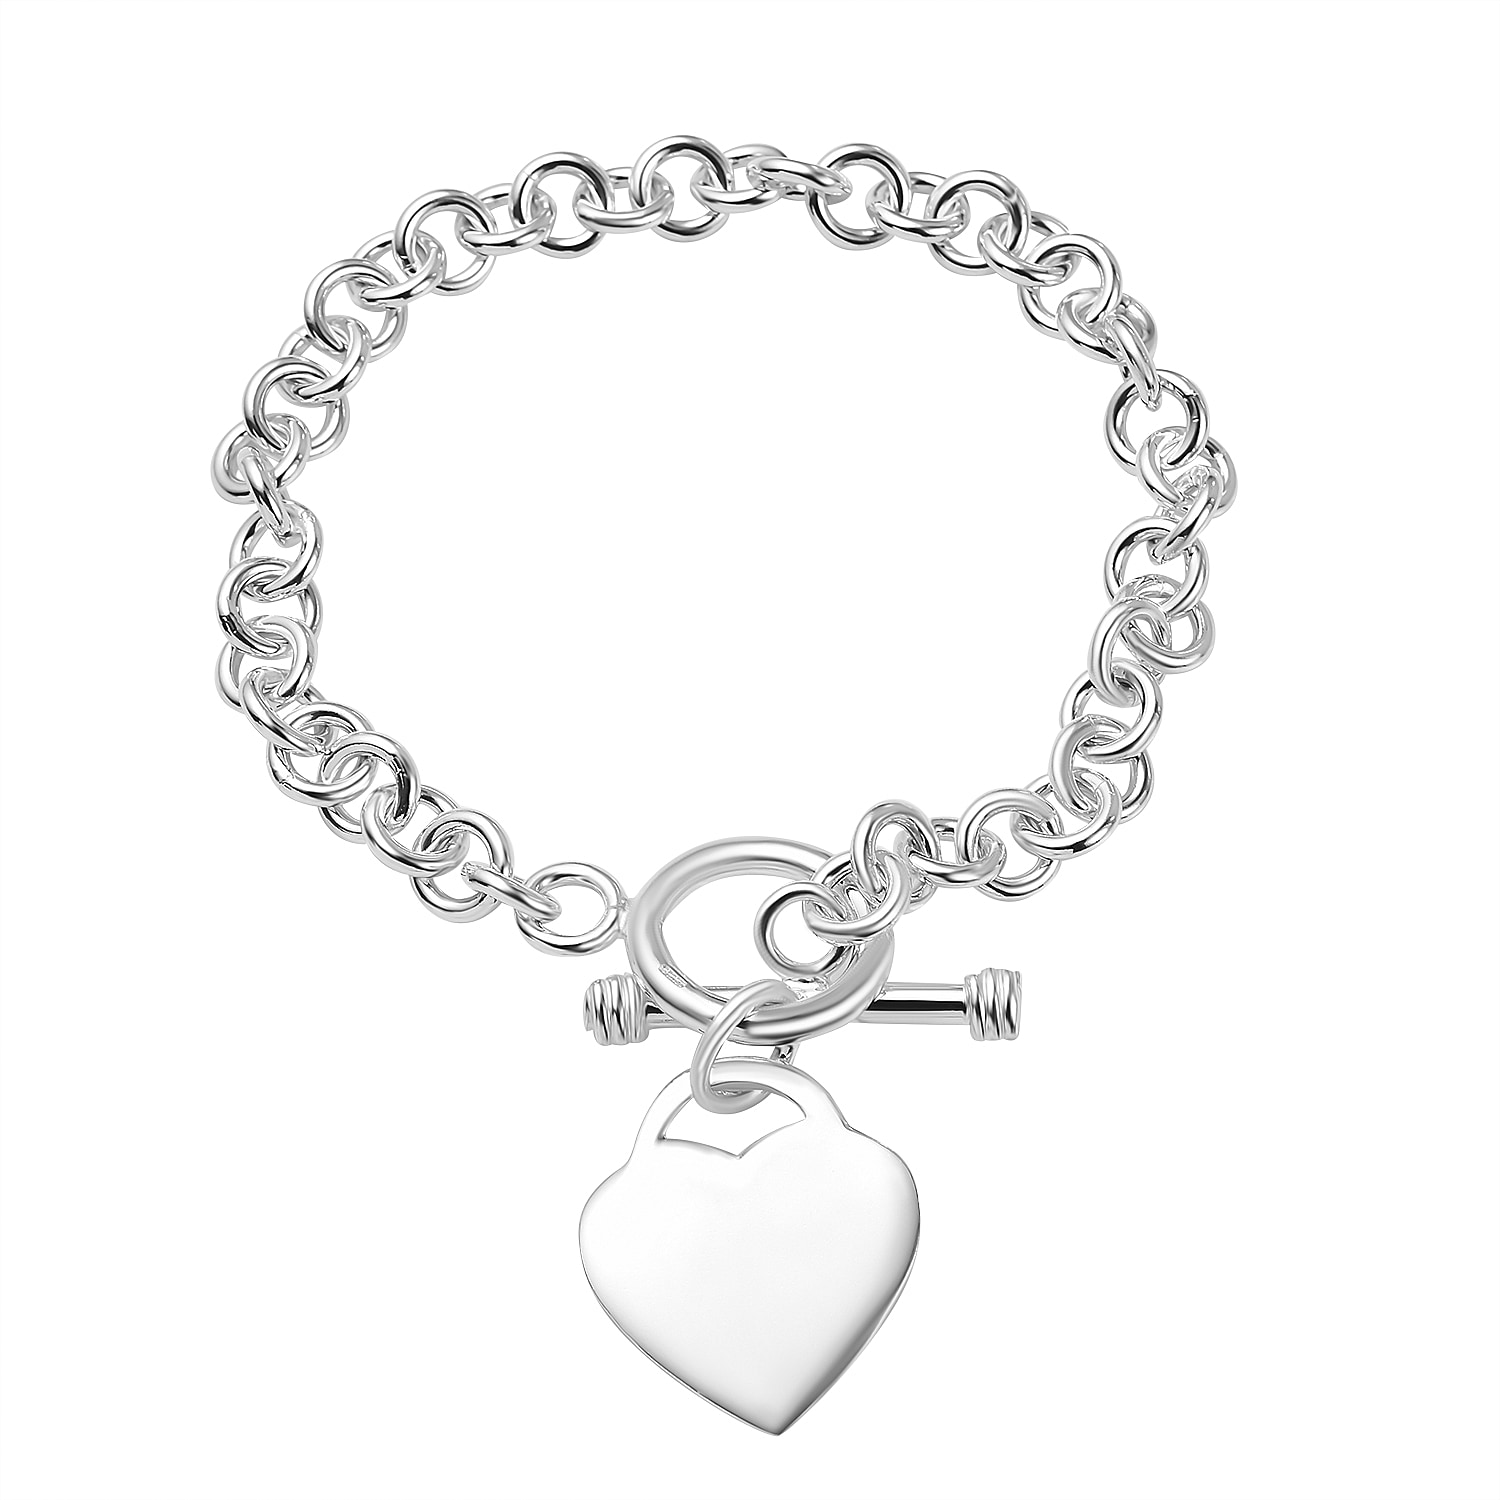 Vicenza Closeout - Sterling Silver Heart Charm Bracelet (Size - 7.5) With T-Bar Clasp